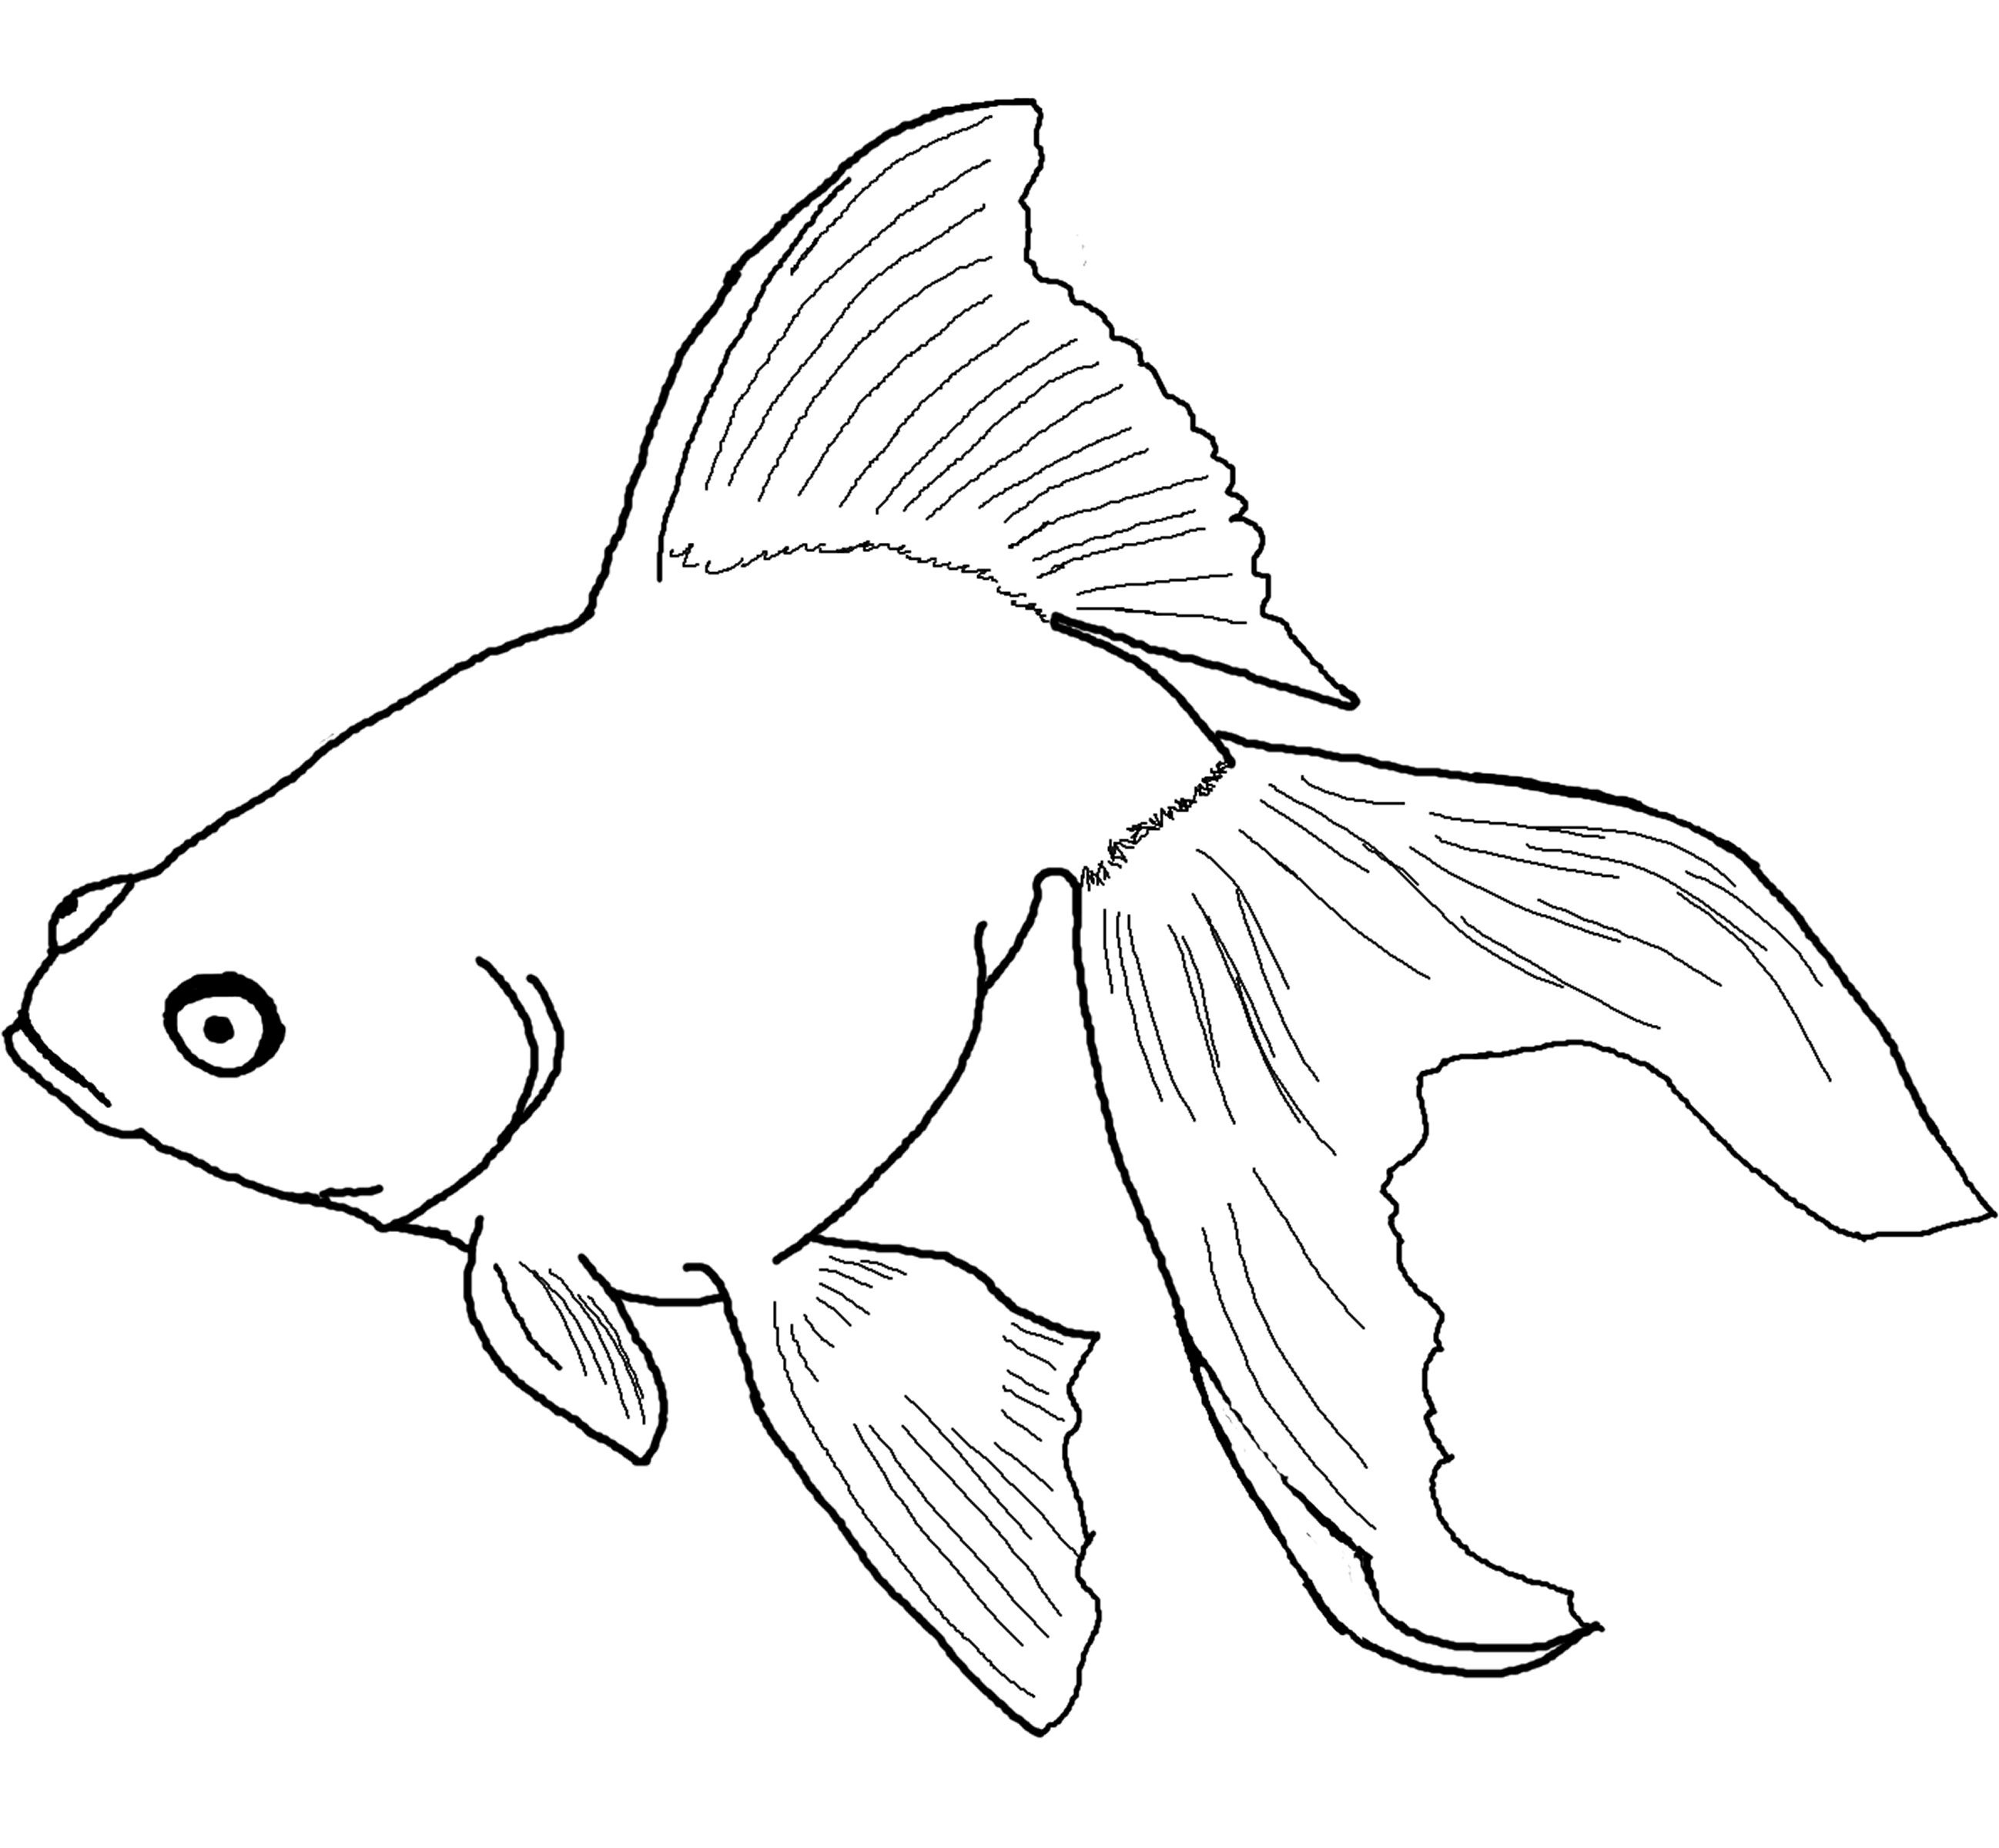 cute-fish-coloring-pages-printable-kids-colouring-pages-fish-coloring-page-fish-drawings